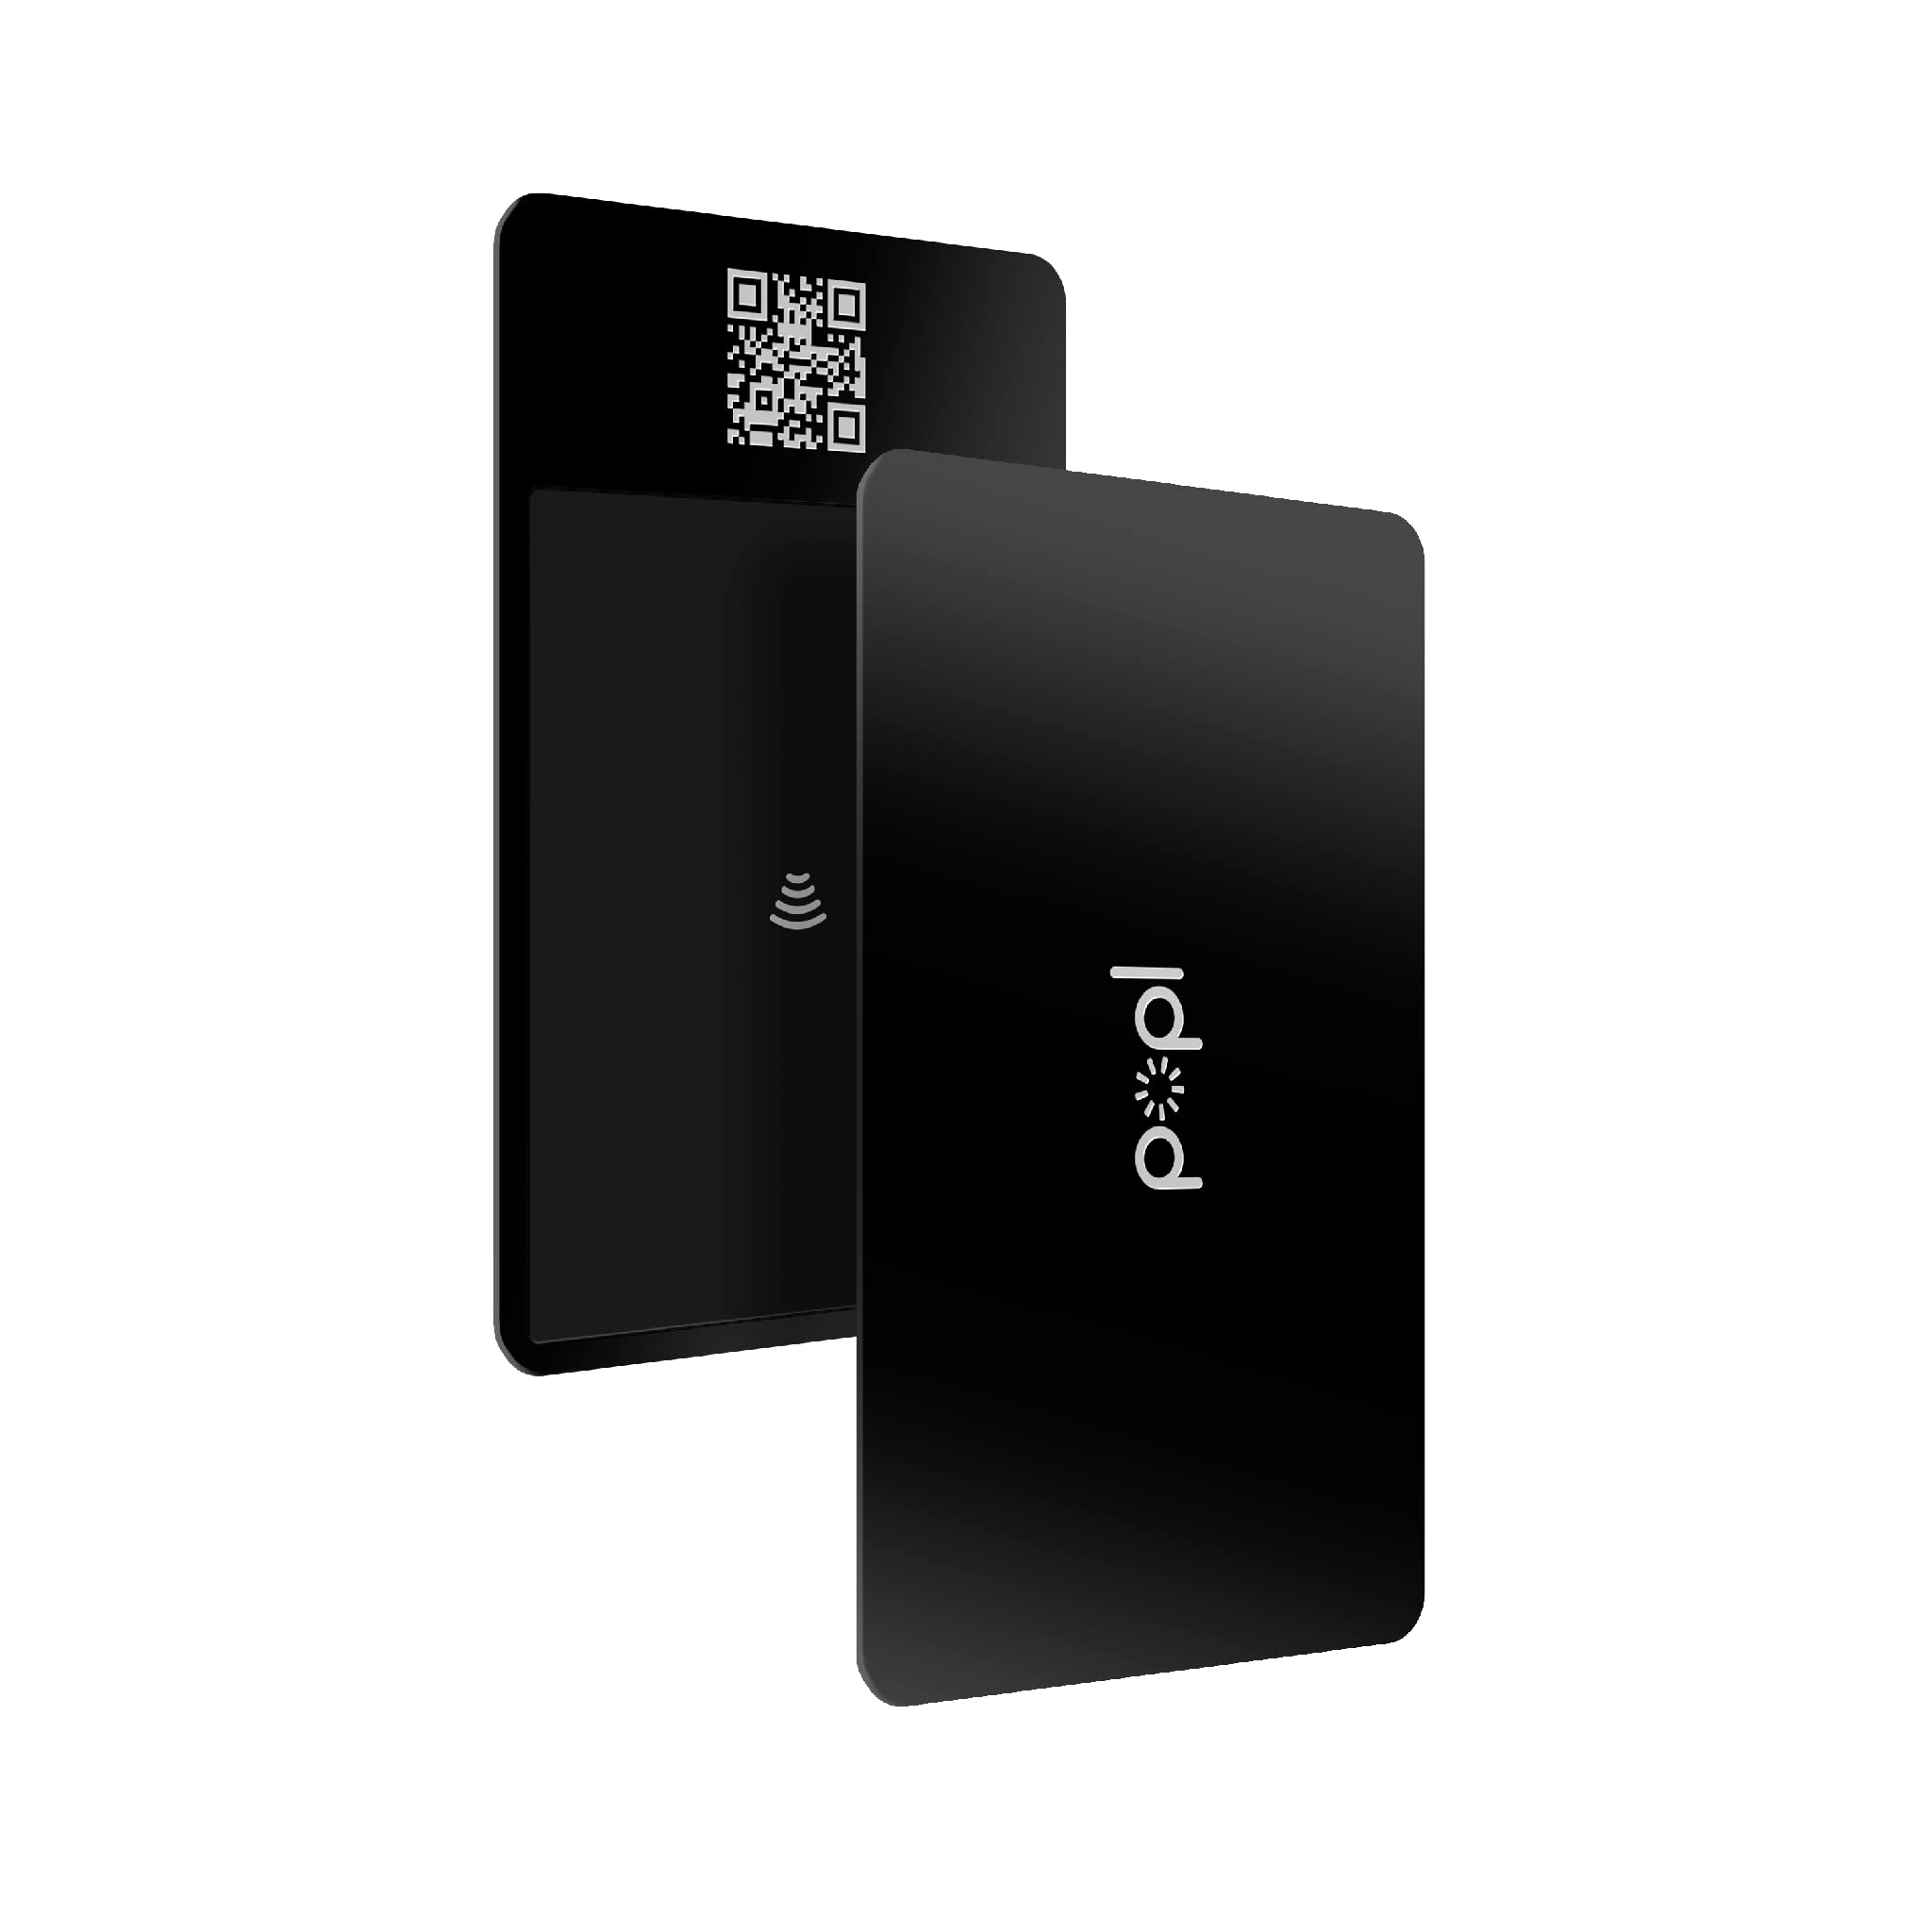 Popl Metal Digital Business Card - Smart NFC Networking Card - Tap to Share  - iPhone & Android (Metal Black)